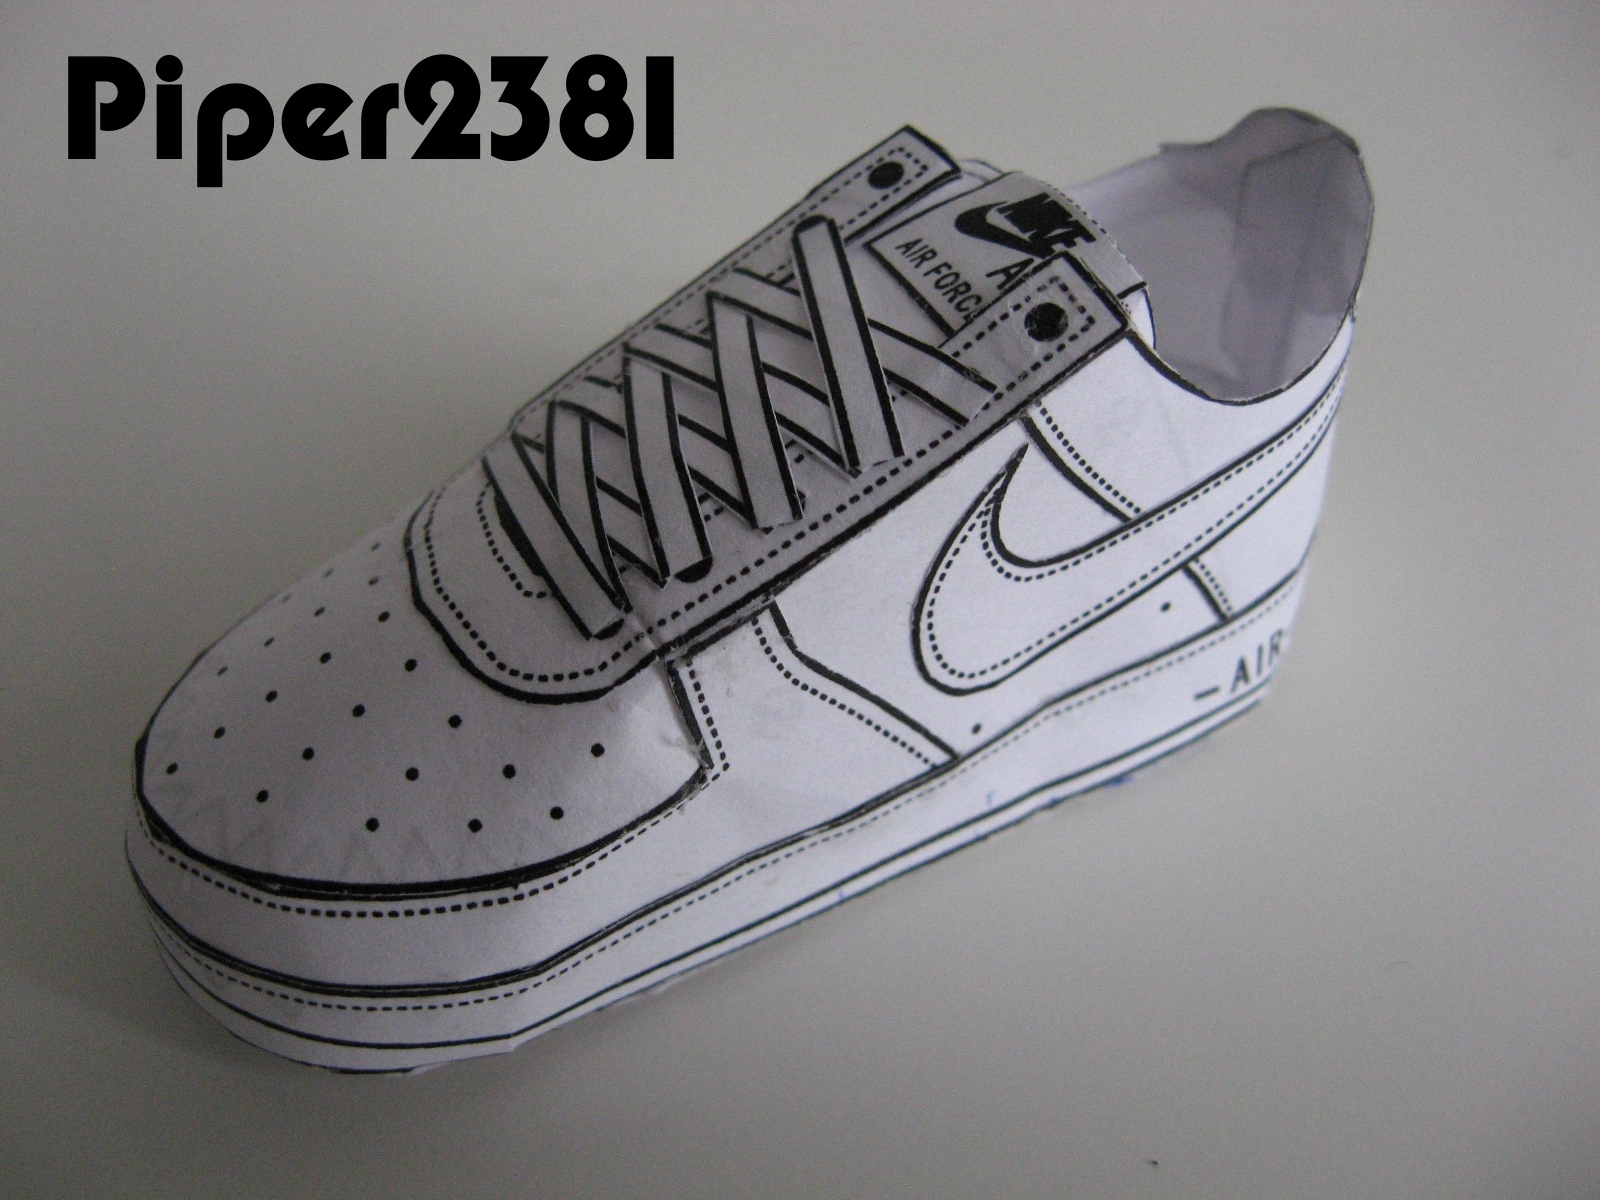 Piper2381 Nike Air Force 1 Papercraft